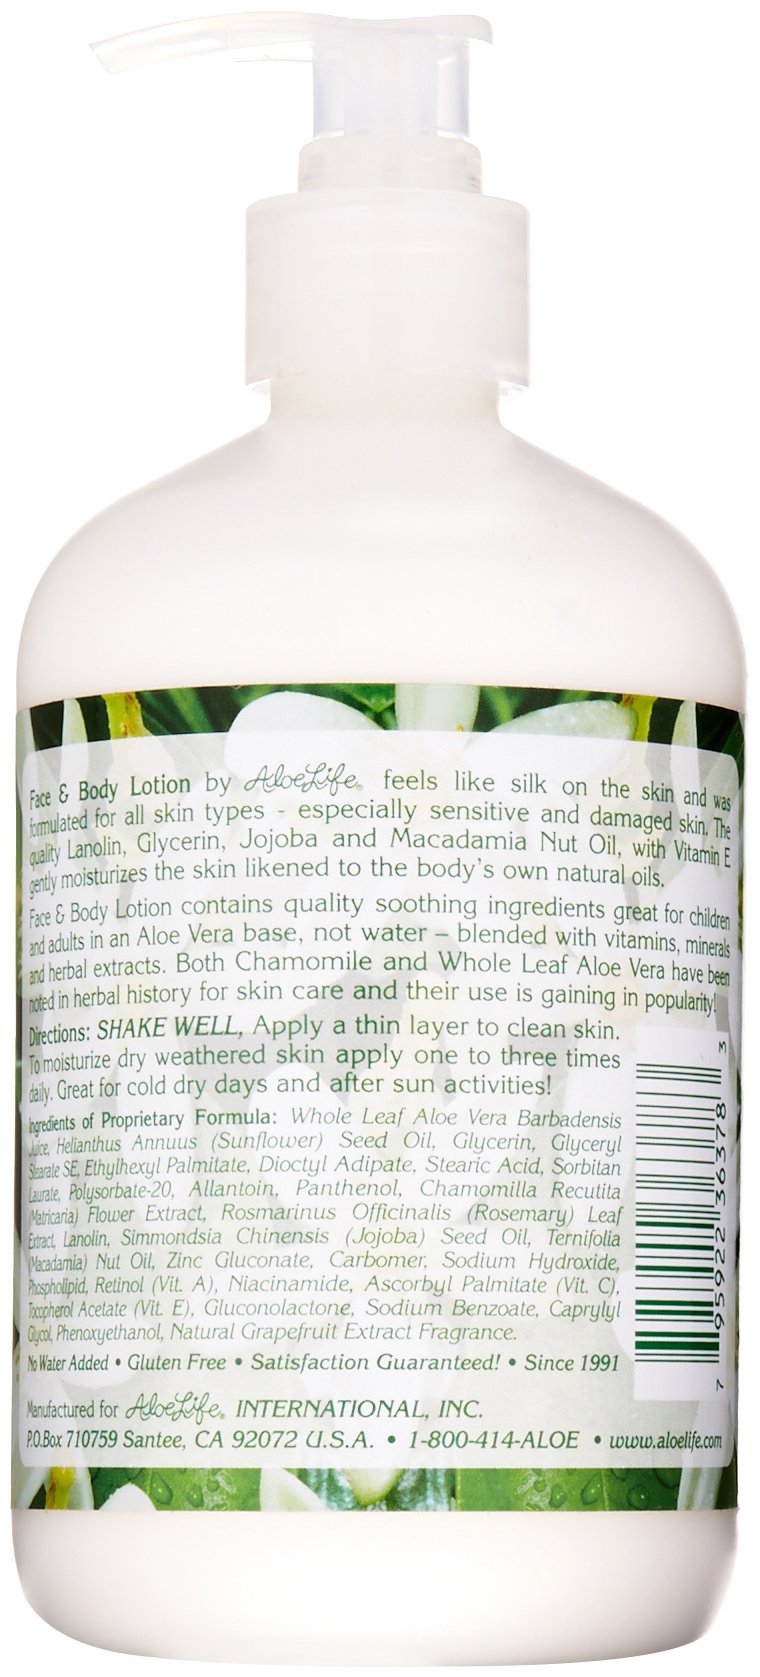 [Australia] - Aloe Life - Face and Body Lotion, Lubricates, Protects and Moistens the Skin, Formulated for All Skin Types, Great for Sensitive and Damaged Skin (16 Ounces) 16 Fl Oz (Pack of 1) 